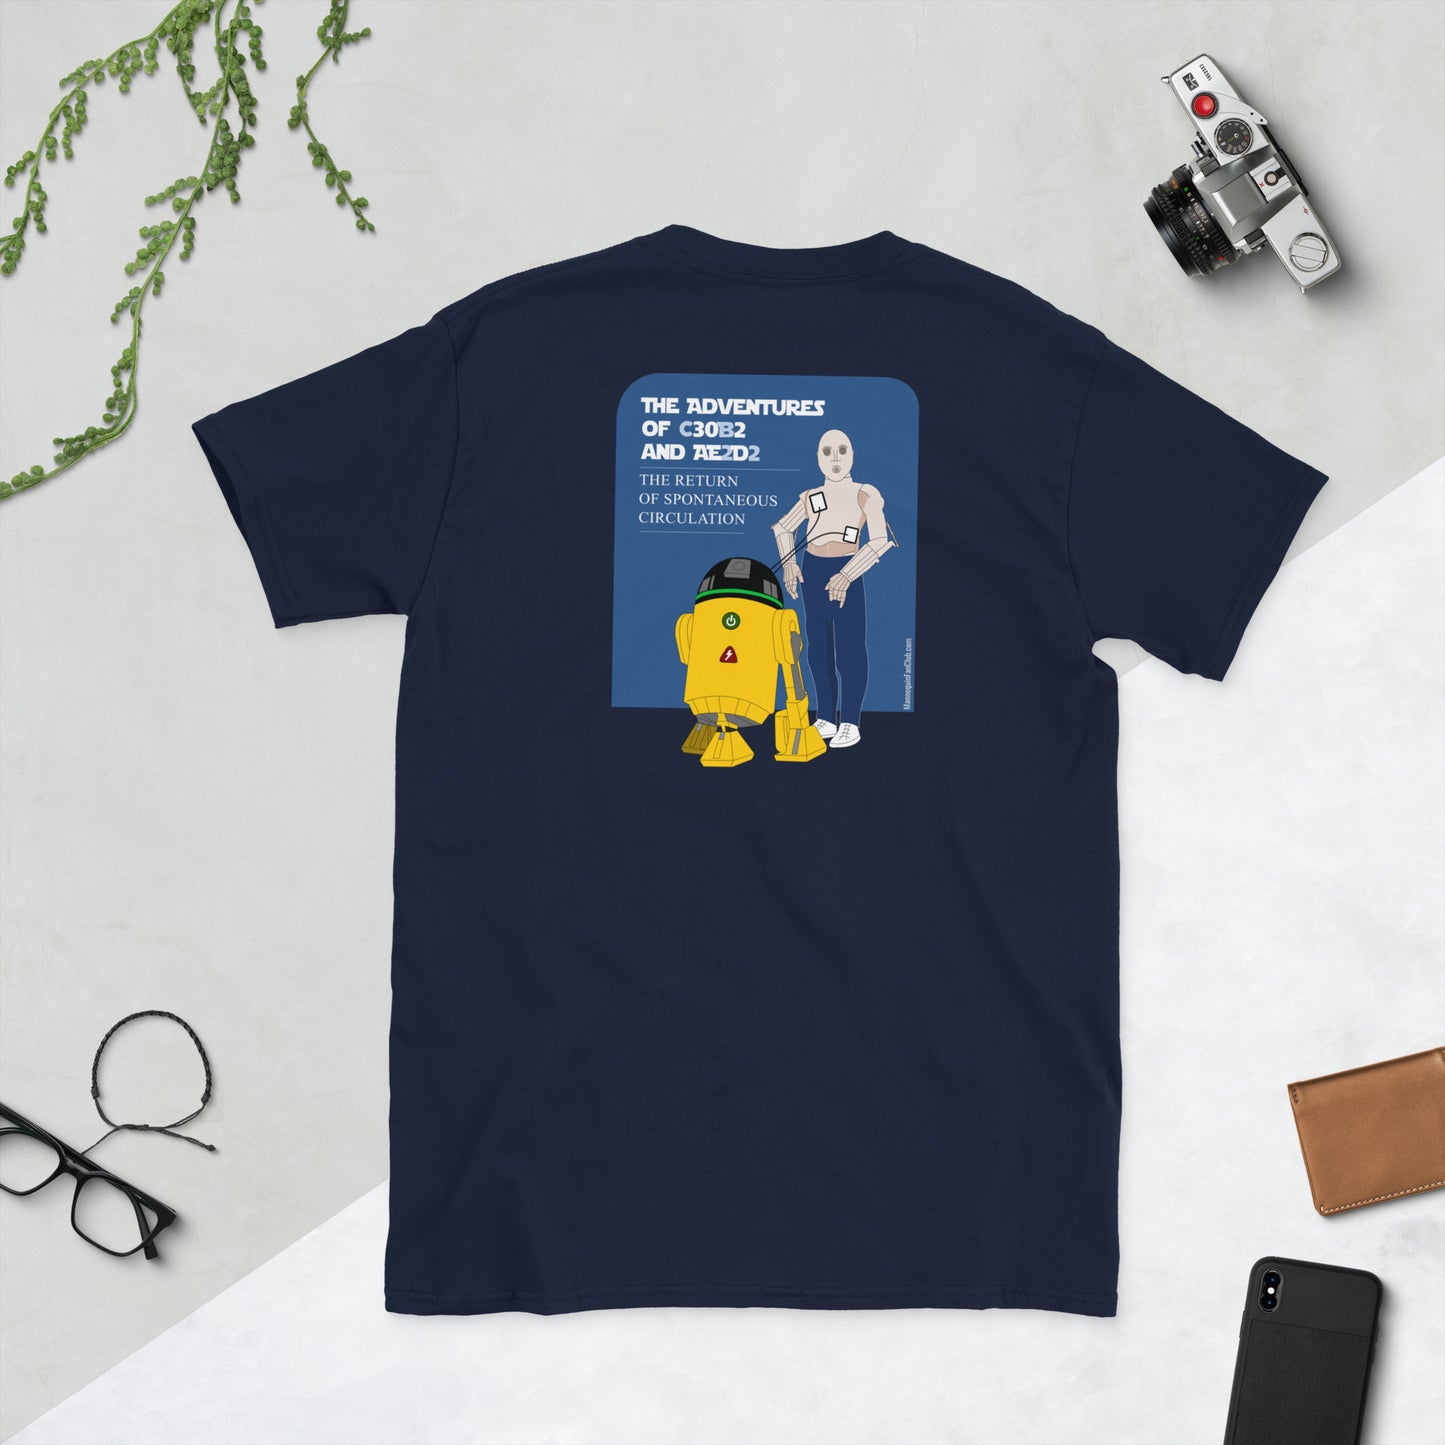 The Adventures of C30B2 / AE2D2 (T-Shirt)